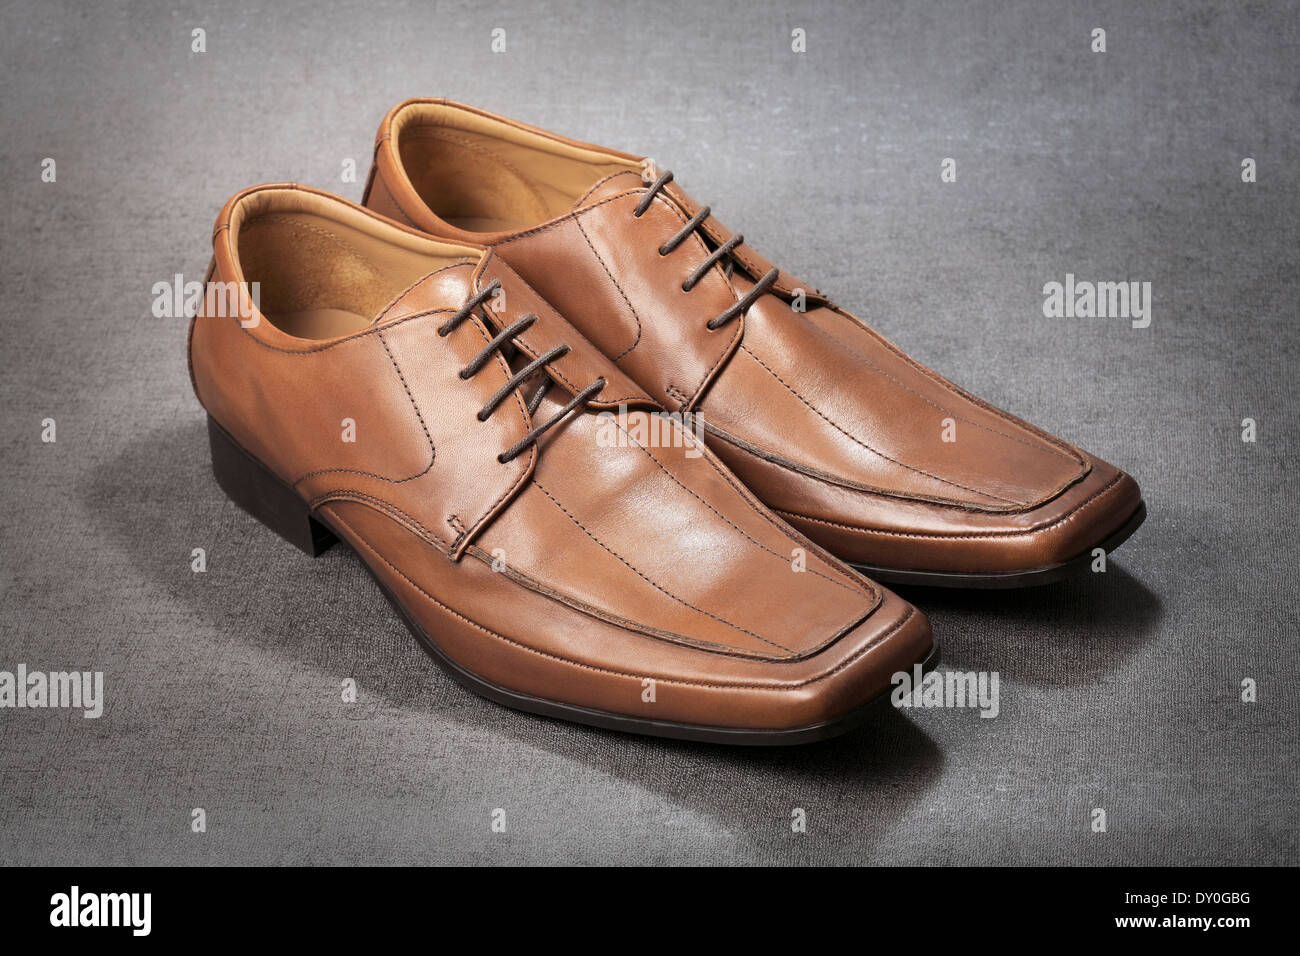 Pair of brown men's shoes Stock Photo - Alamy